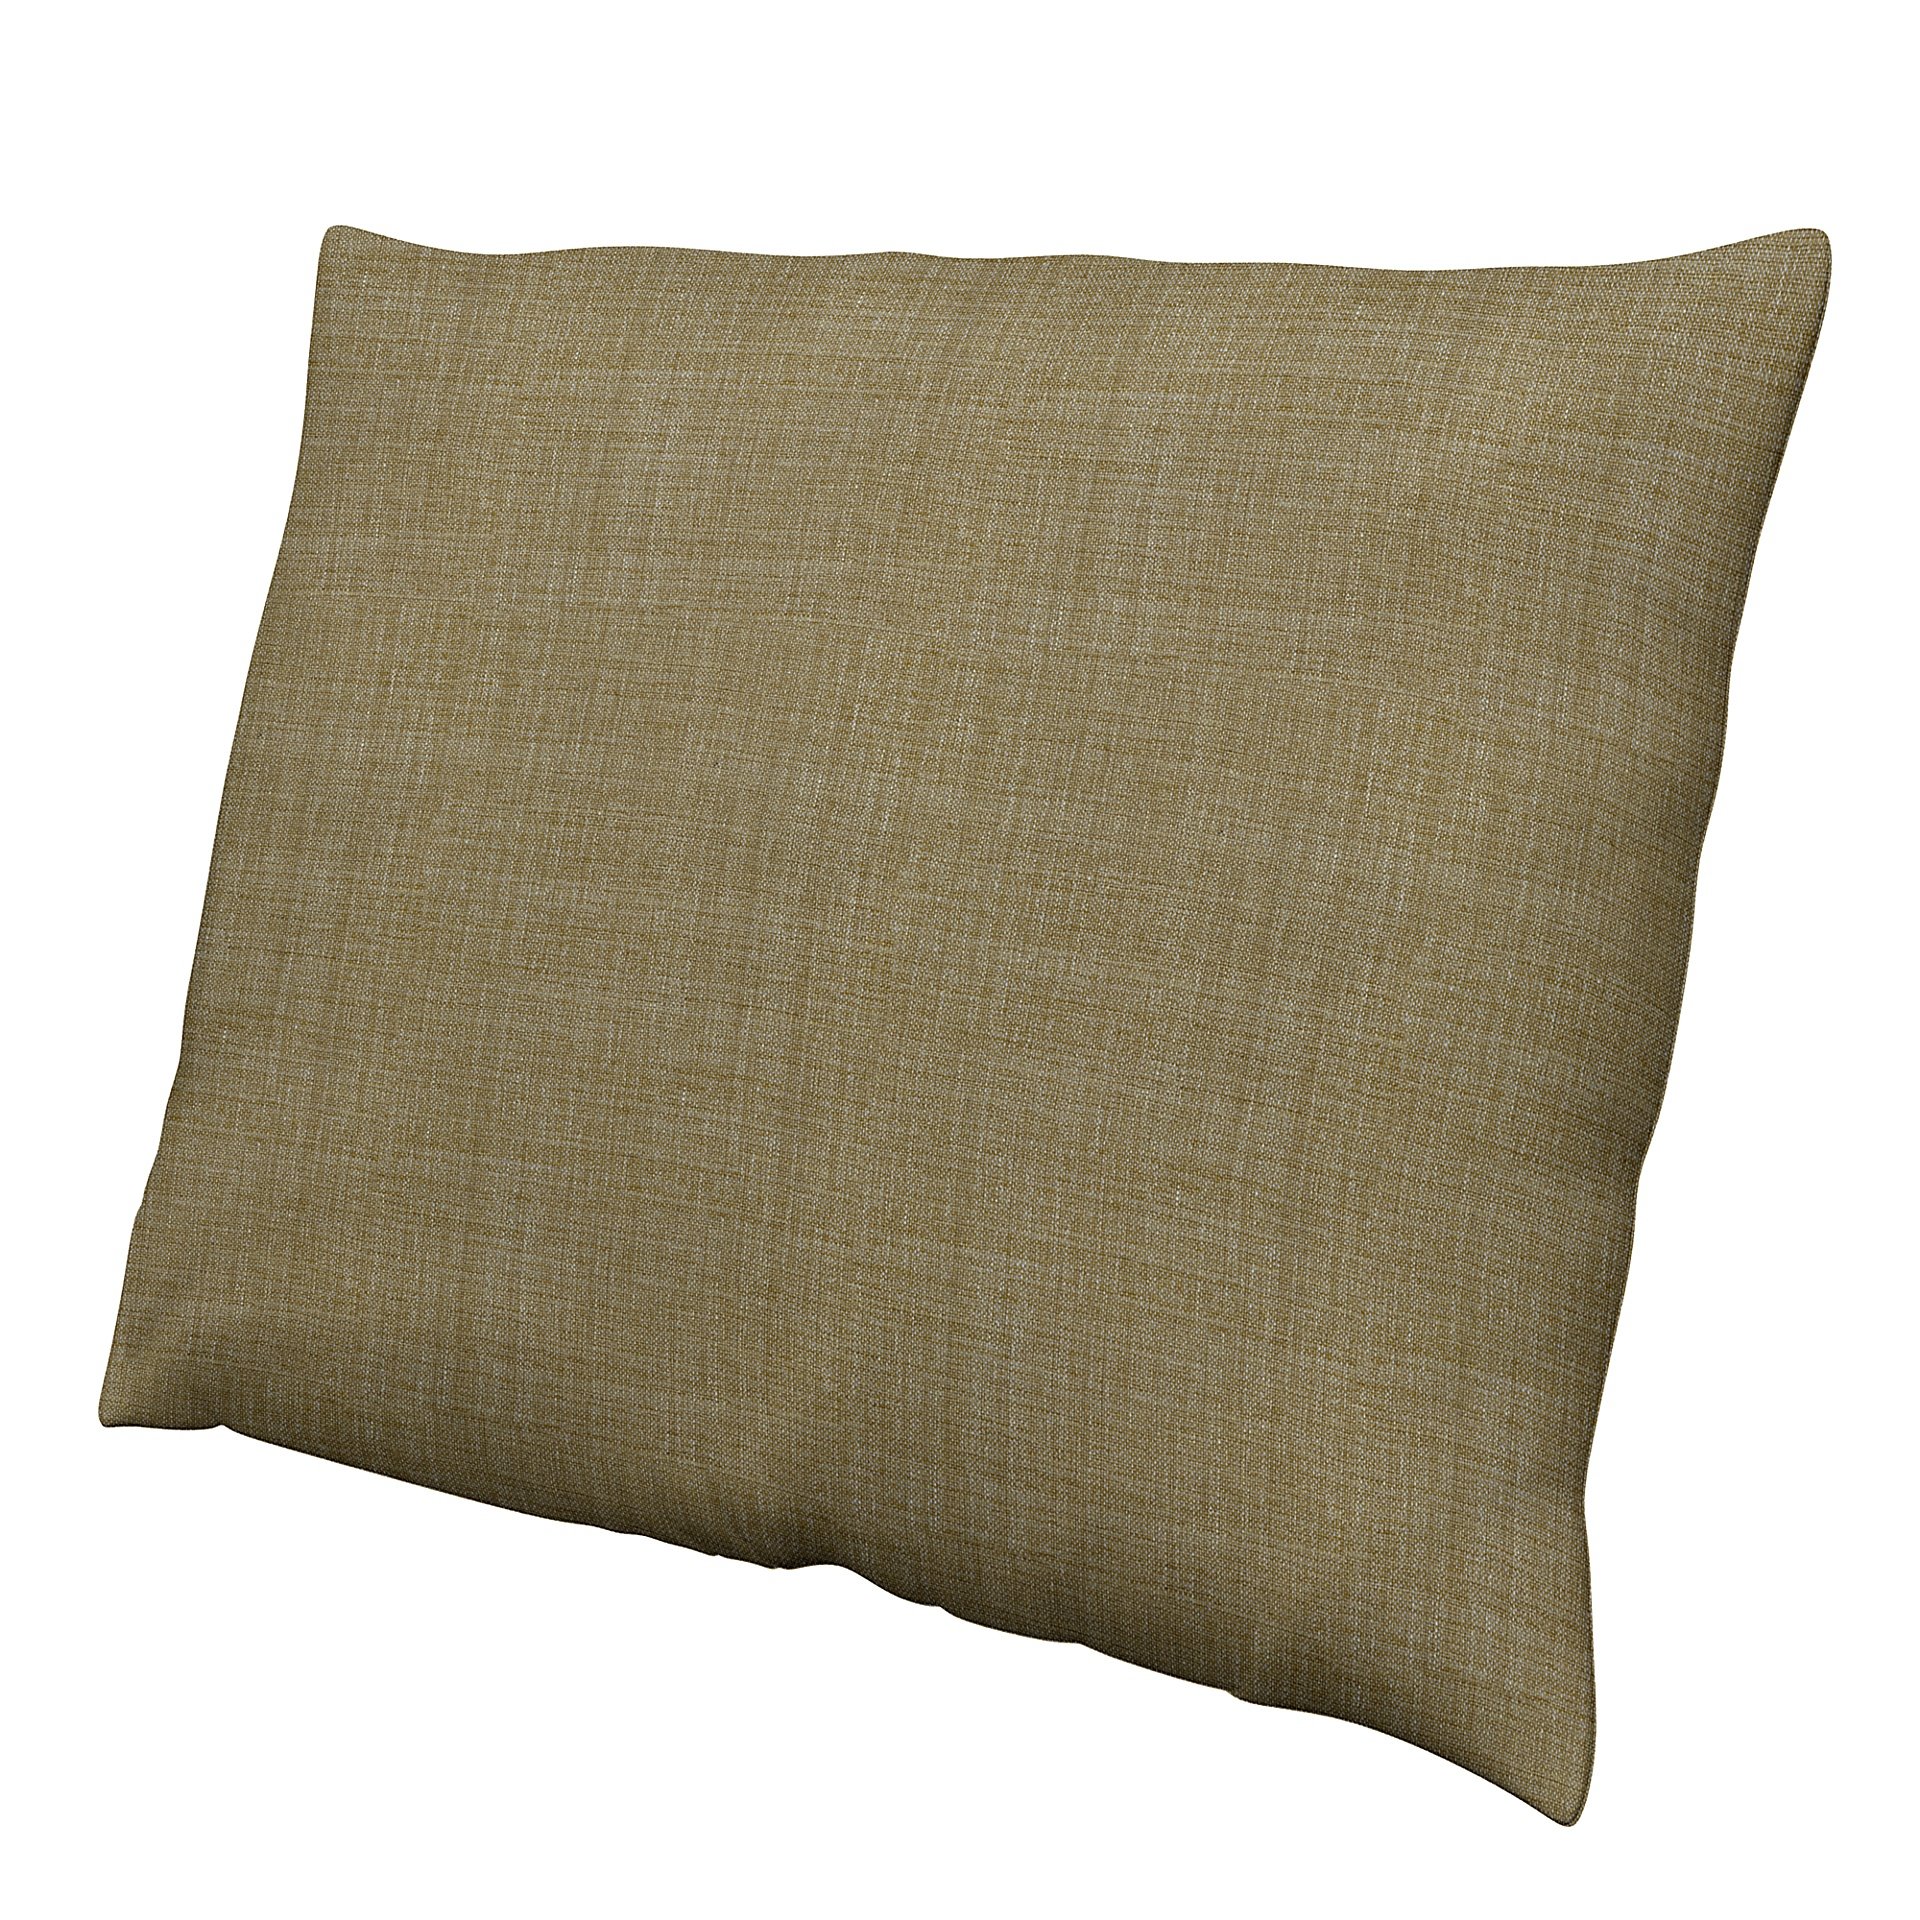 Cushion Cover, Dusty Yellow, Boucle & Texture - Bemz